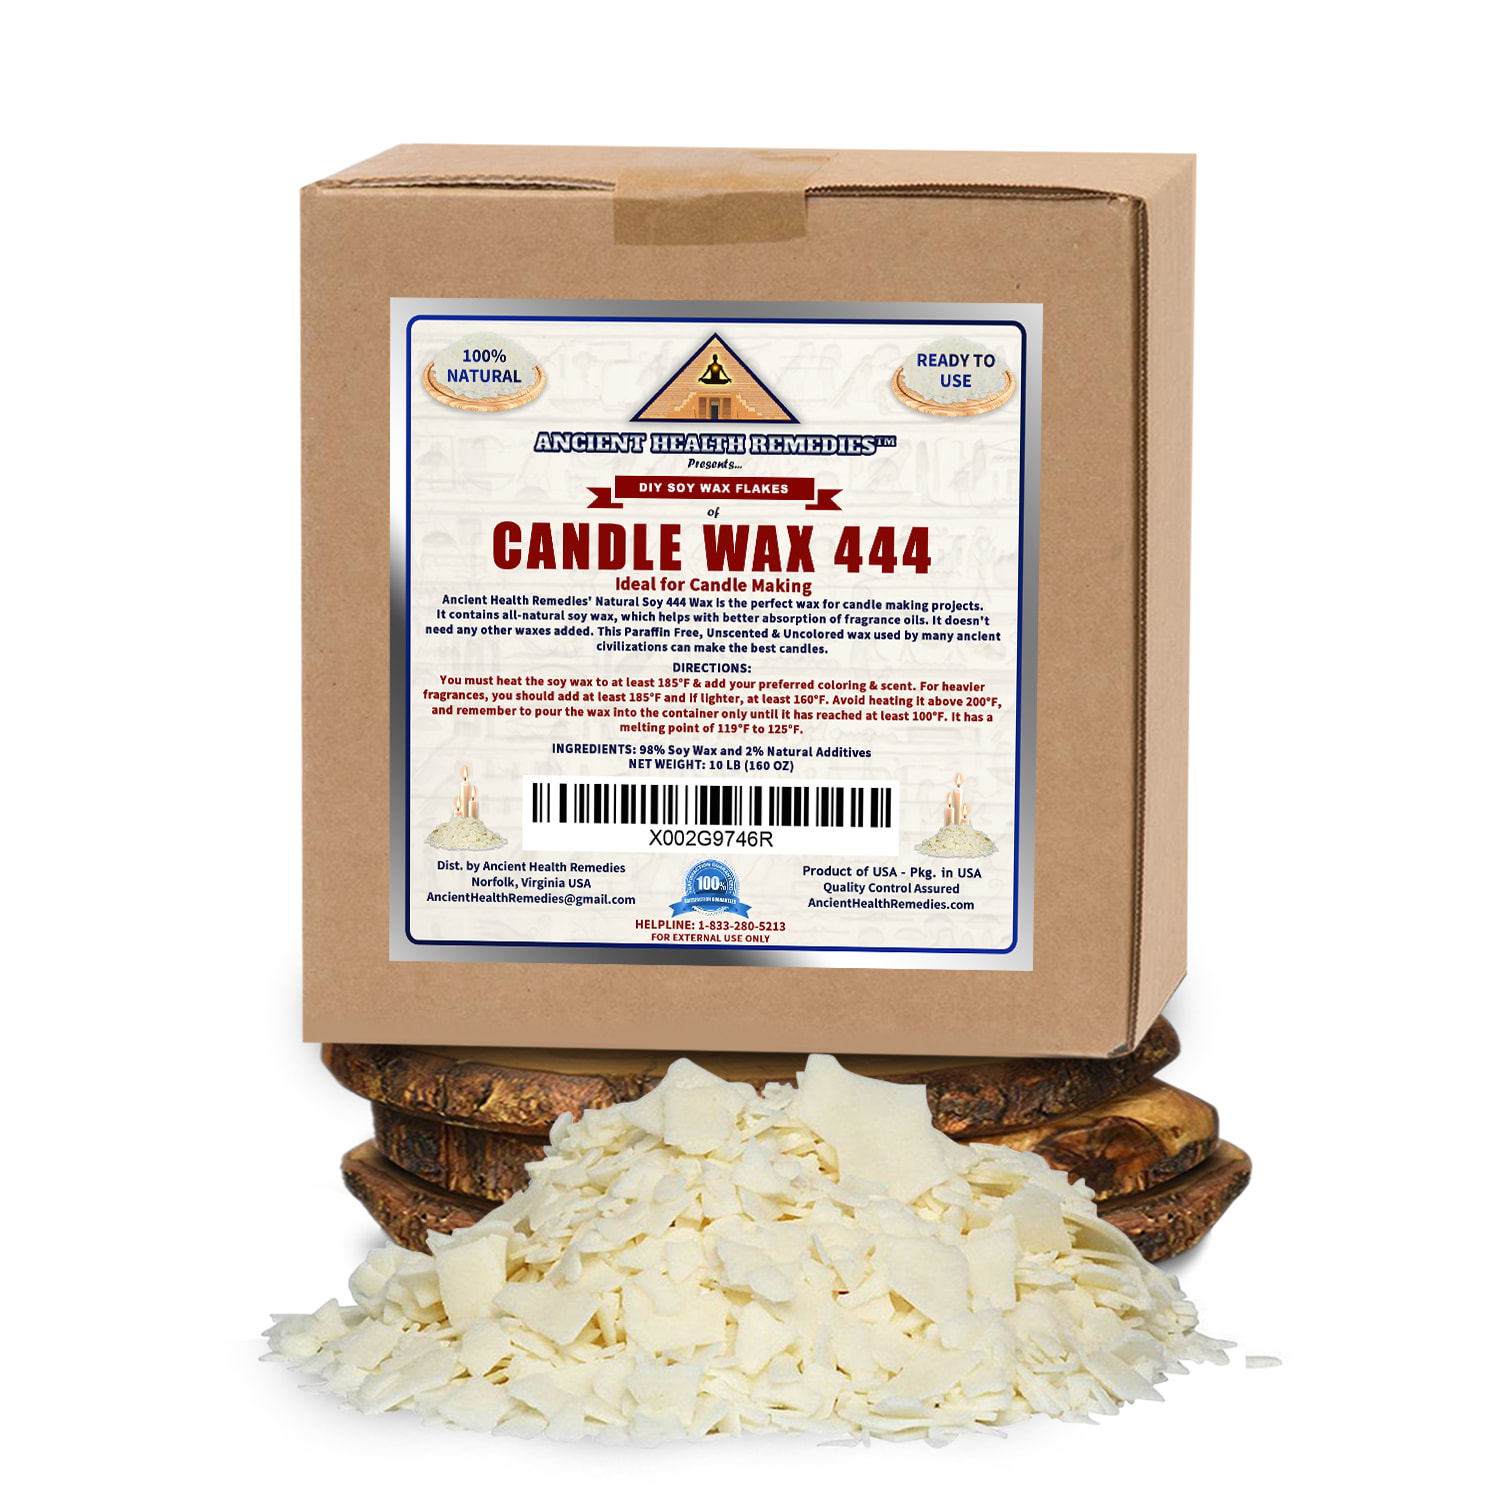 Bulk Wax for DIY Projects, Wholesale Candle Wax